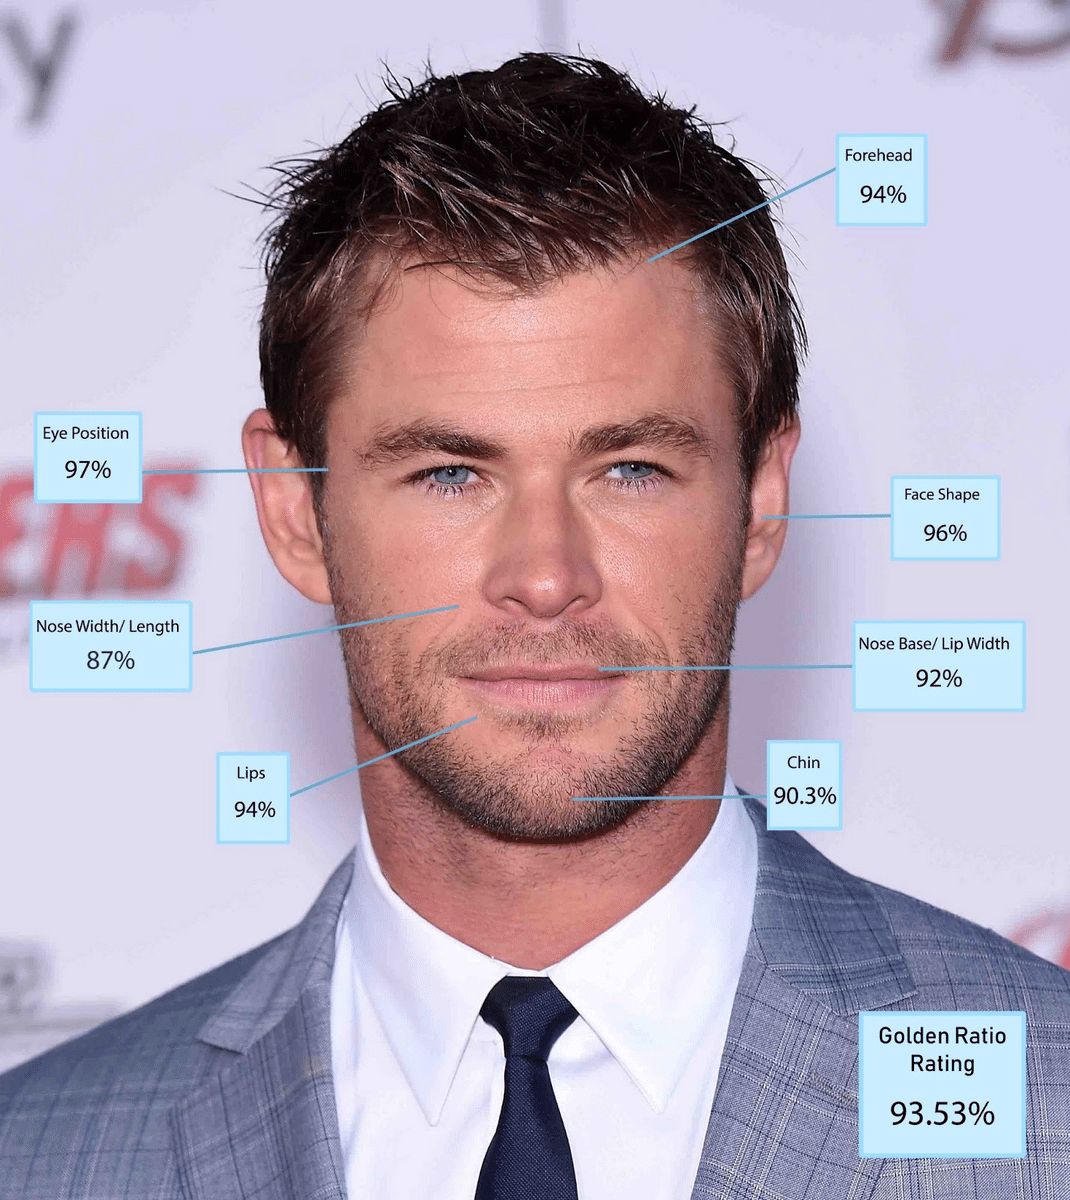 Chris Hemsworth is an Australian actor best known for portraying Thor in Marvel films. 